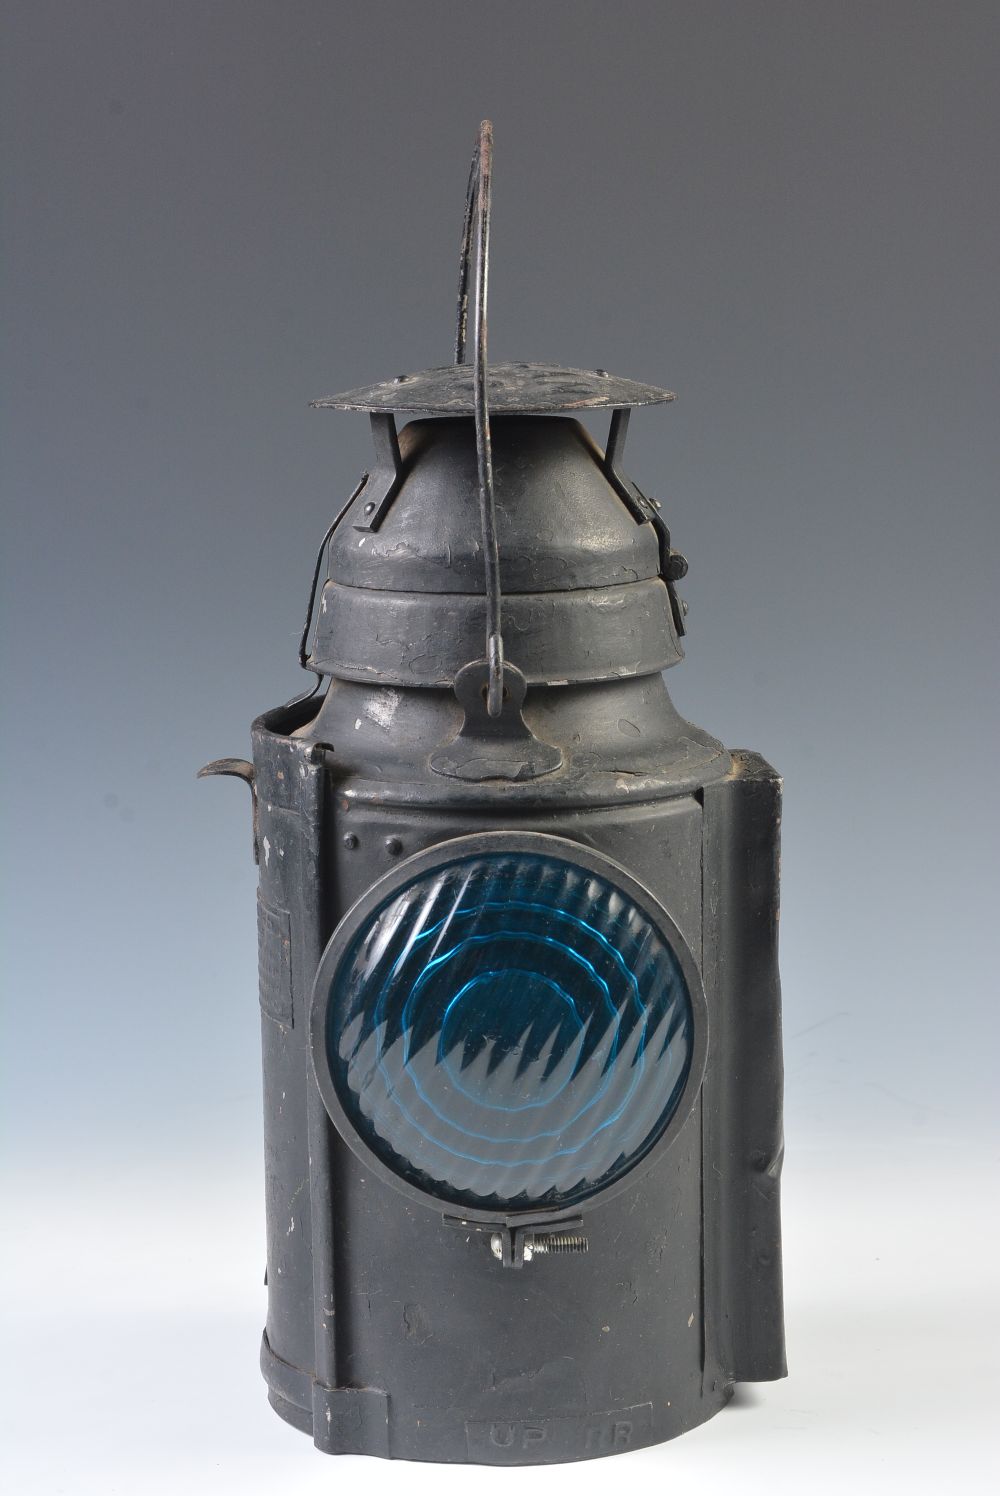 A HANDLAN BUCK UP RR SIGNAL LAMP WITH COLORED ROUNDEL